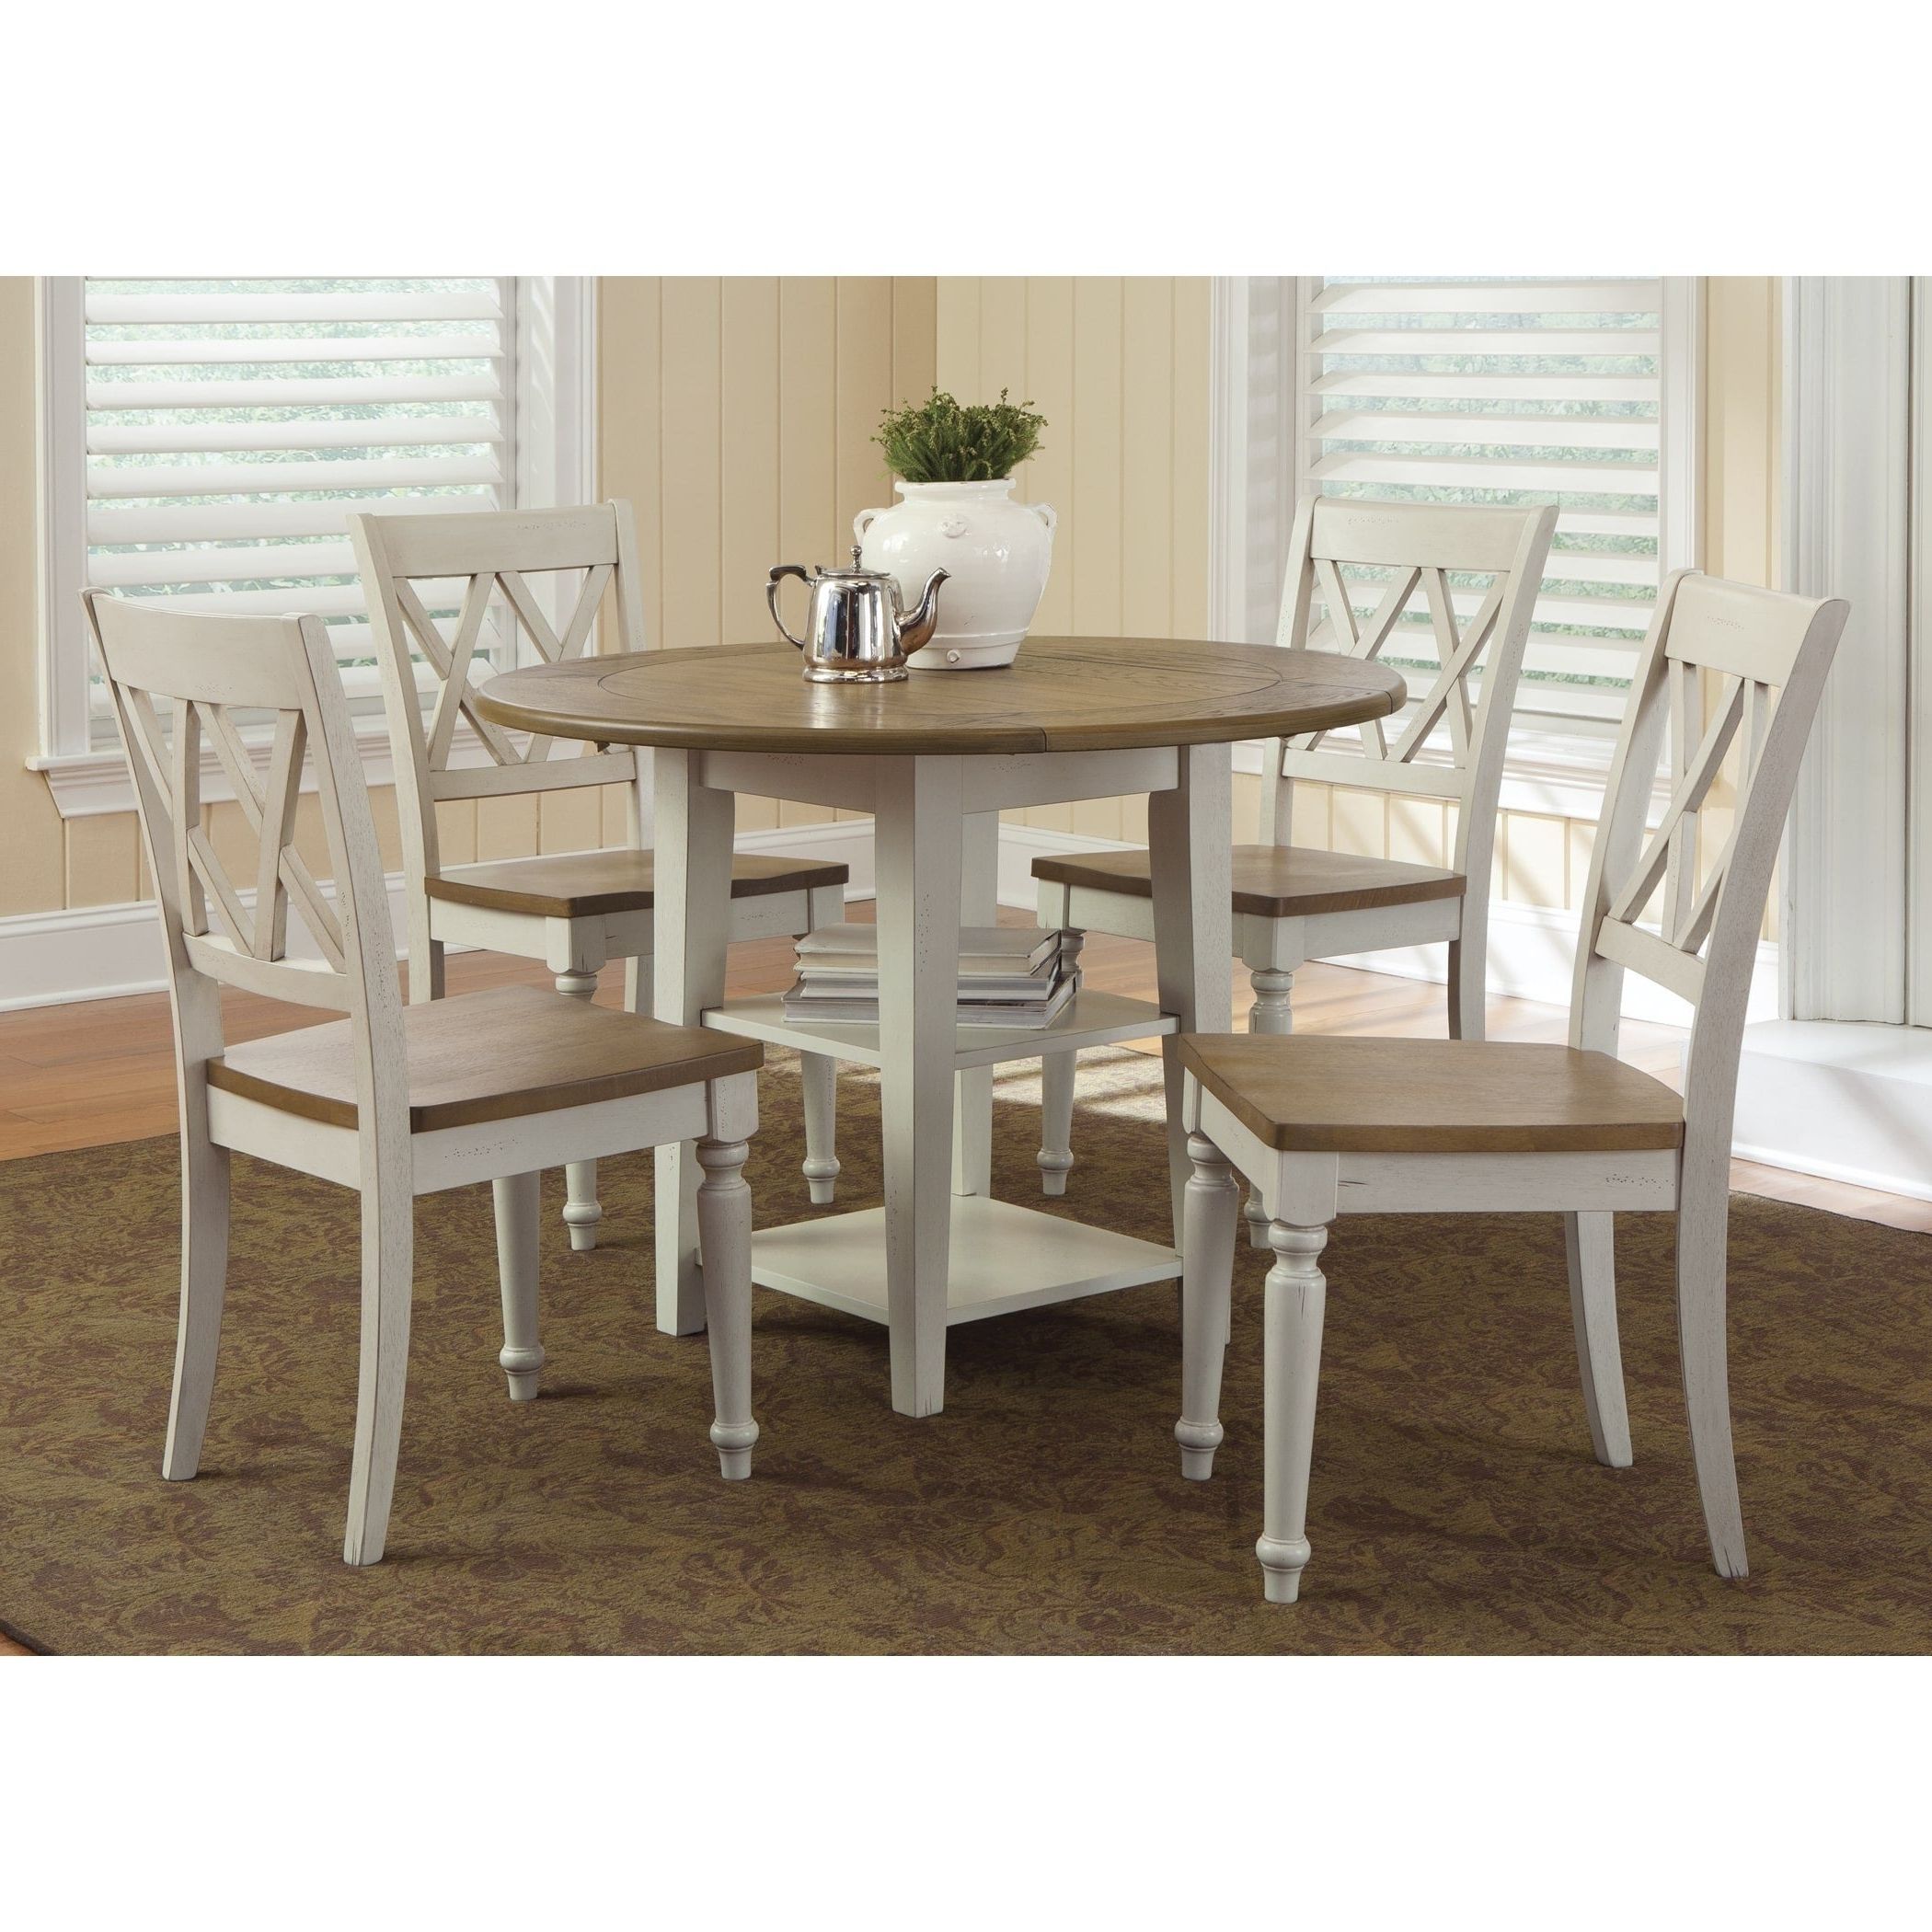 Al Fresco Two Tone Transitional Drop Leaf Leg Table – Antique White Inside 2019 Transitional Antique Walnut Drop Leaf Casual Dining Tables (View 21 of 25)